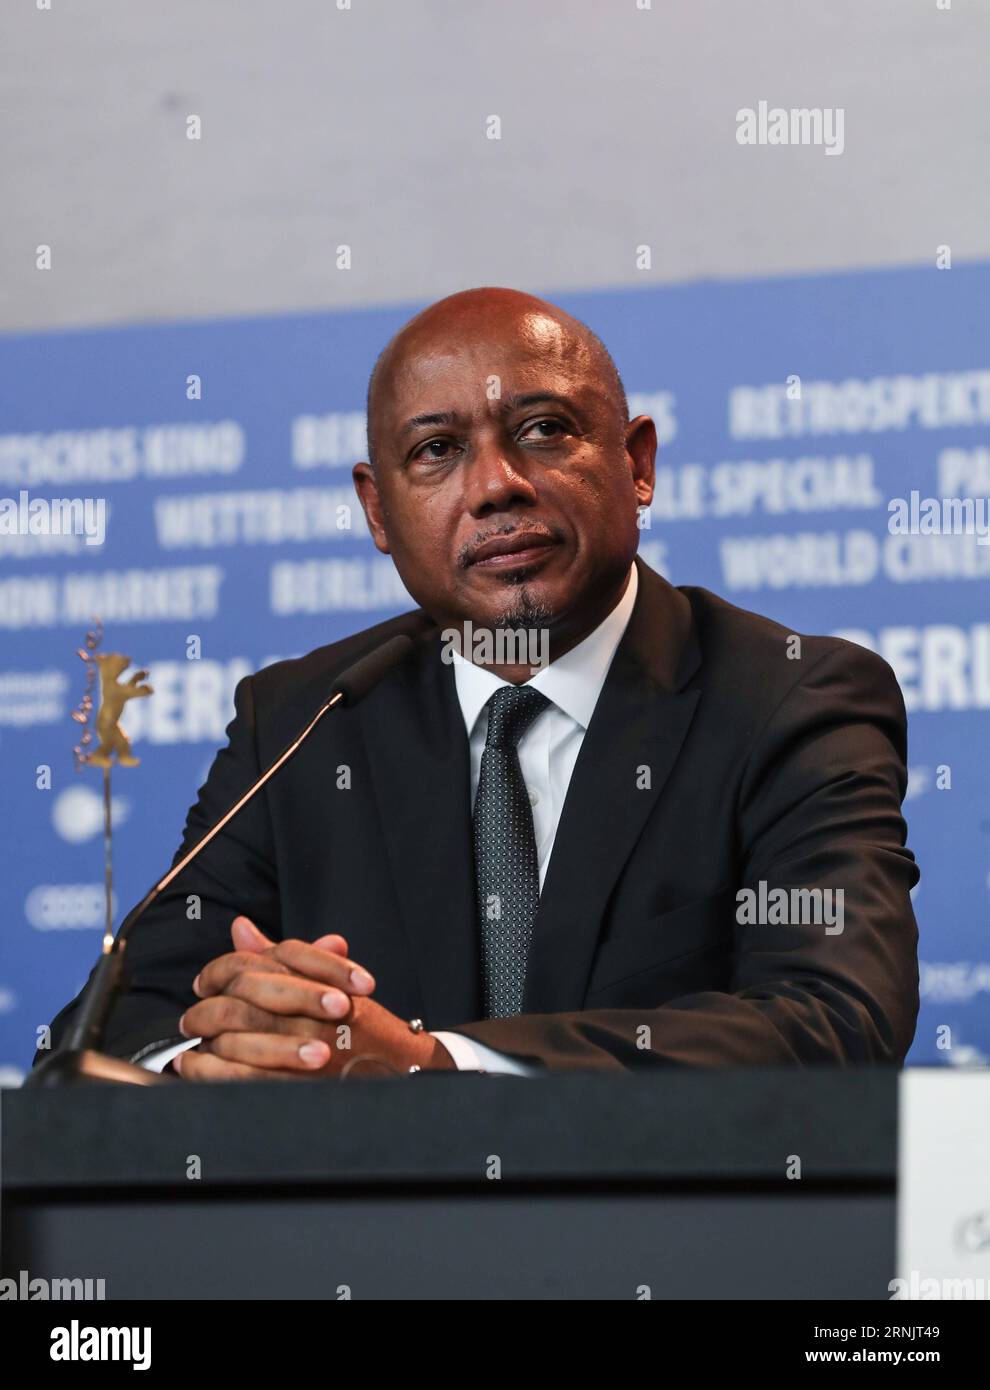 Director Raoul Peck attends a press conference for the film Le jeune Karl Marx (The Young Karl Marx) during the 67th Berlinale International Film Festival in Berlin, capital of Germany, on Feb. 12, 2016. The 67th Berlin International Film Festival runs from Feb. 9 to 19, during which a total of 399 films from 72 countries and regions will be screened and a series of cultural events will be held. )(gj) GERMANY-BERLIN-67TH BERLINALE- LE JEUNE KARL MARX ShanxYuqi PUBLICATIONxNOTxINxCHN   Director Raoul Peck Attends a Press Conference for The Film Le Jeune Karl Marx The Young Karl Marx during The Stock Photo